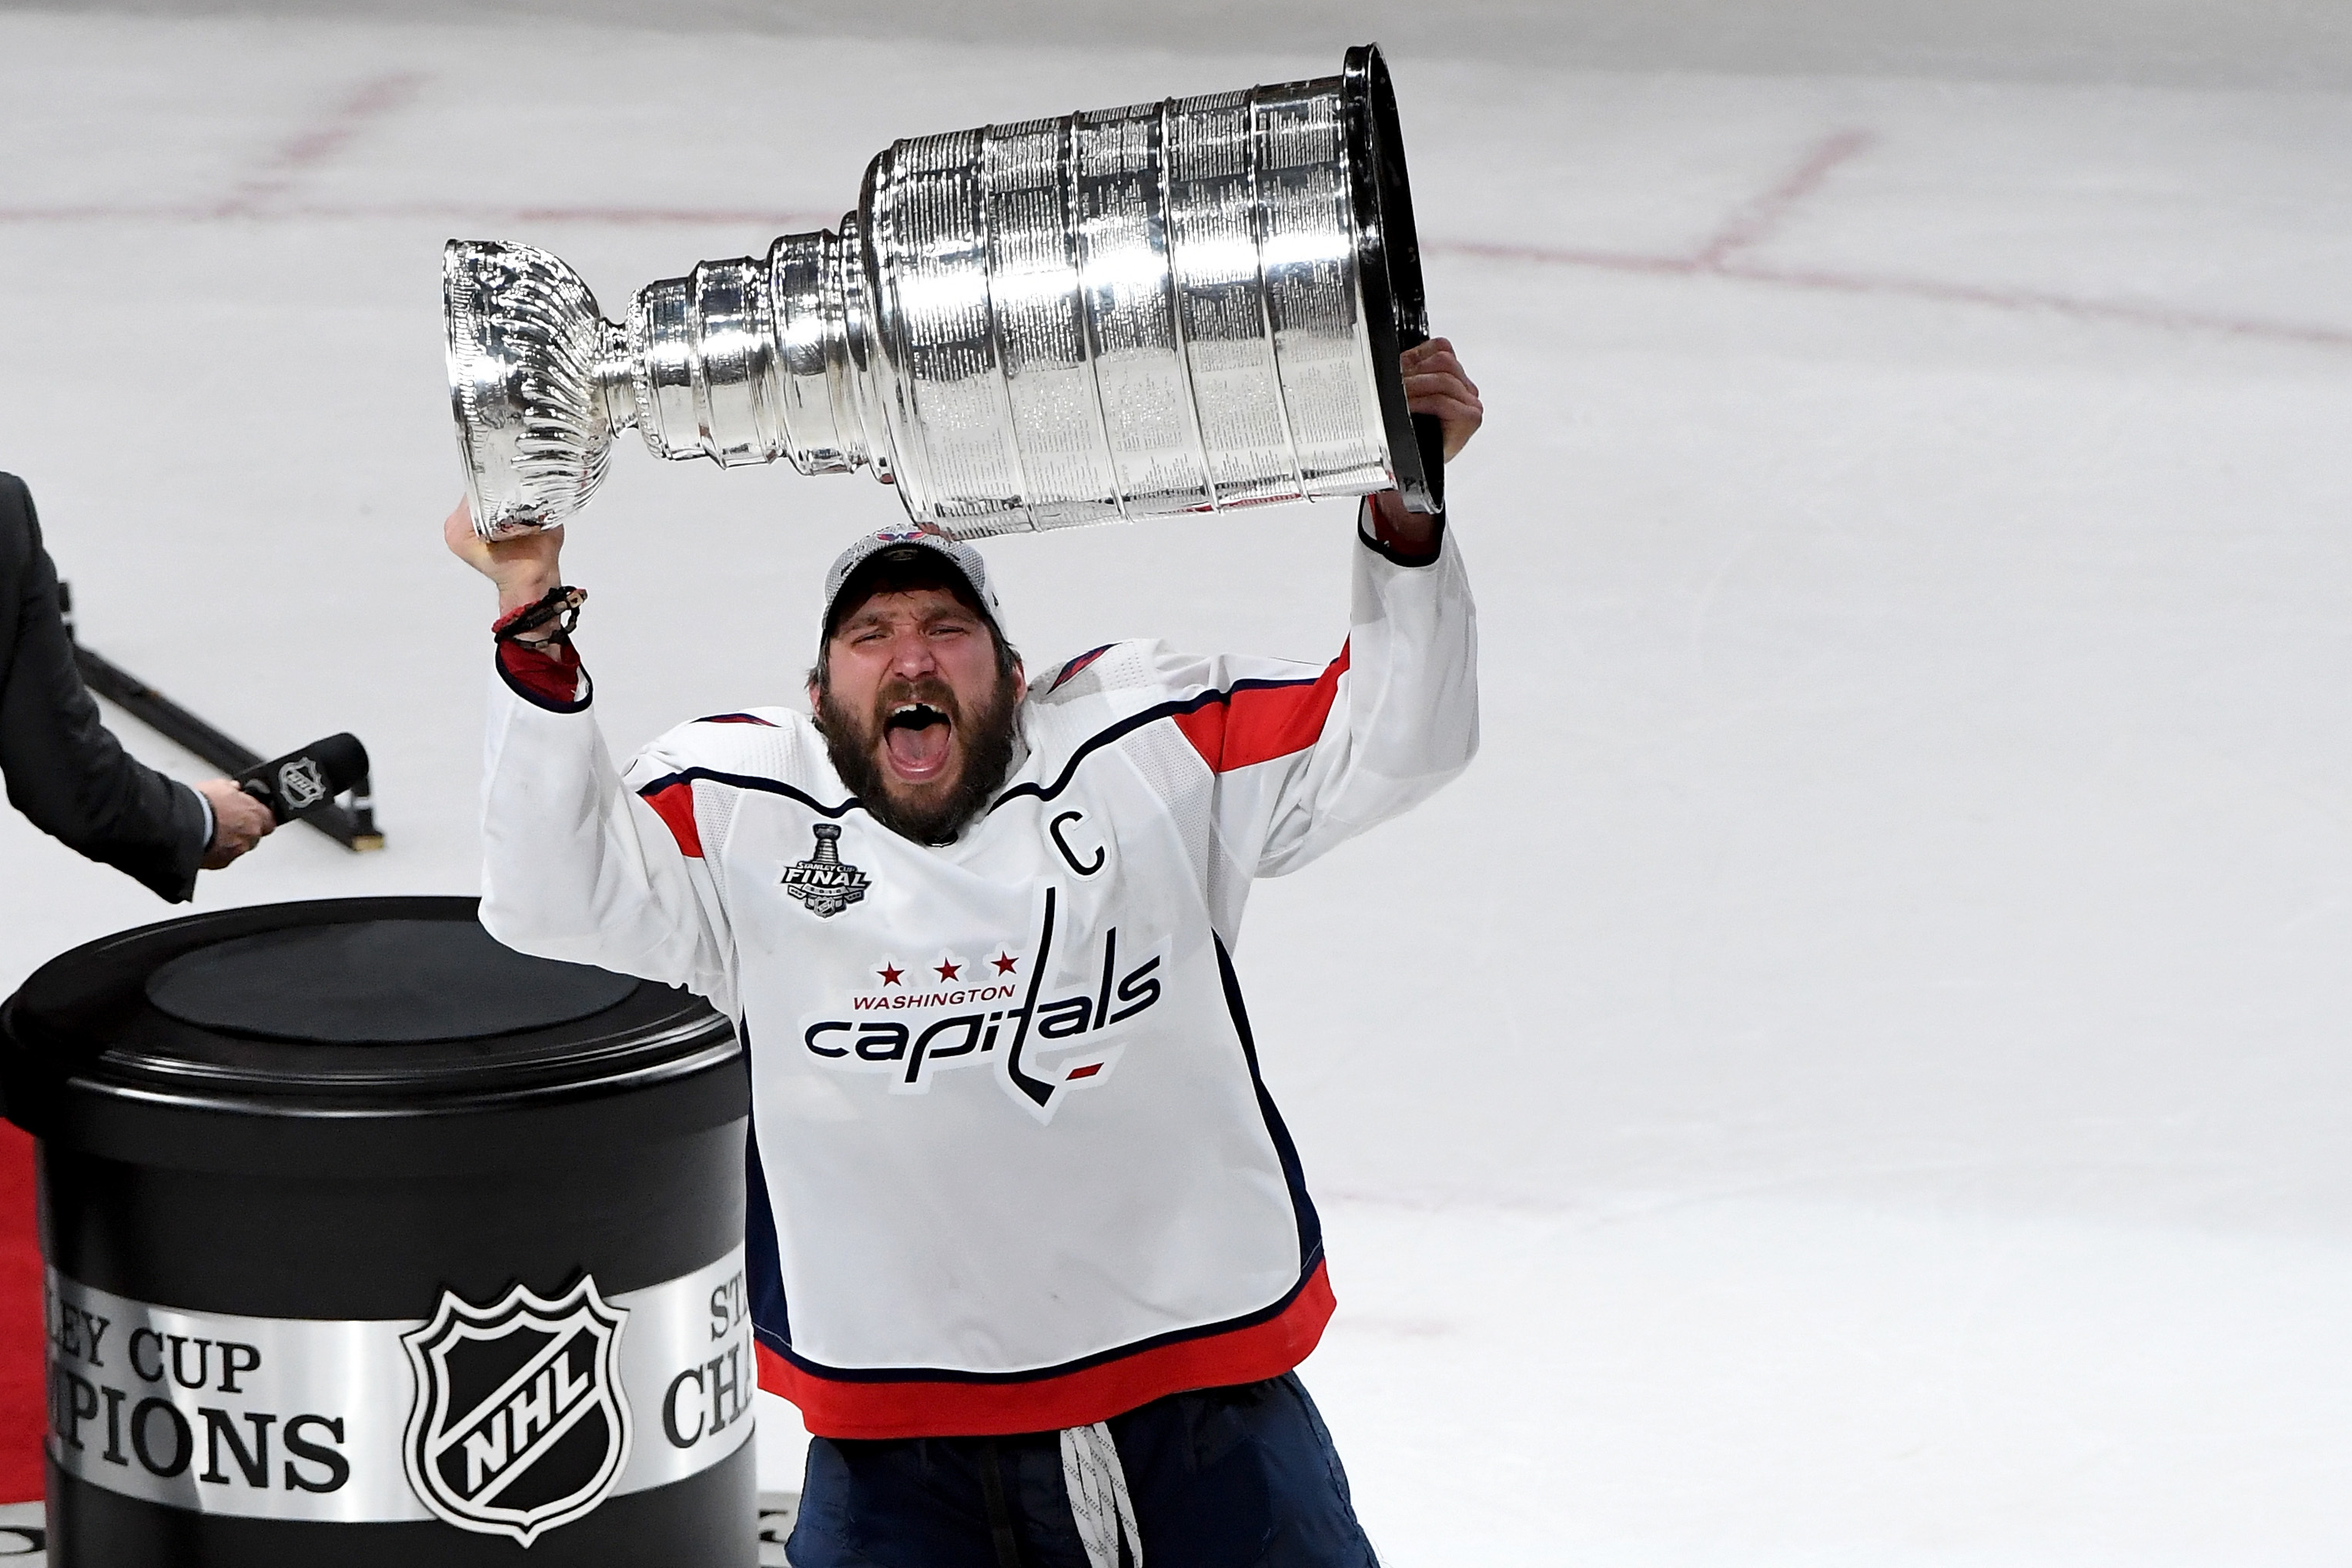 The Capitals won the cup 5 years ago yesterday and then this